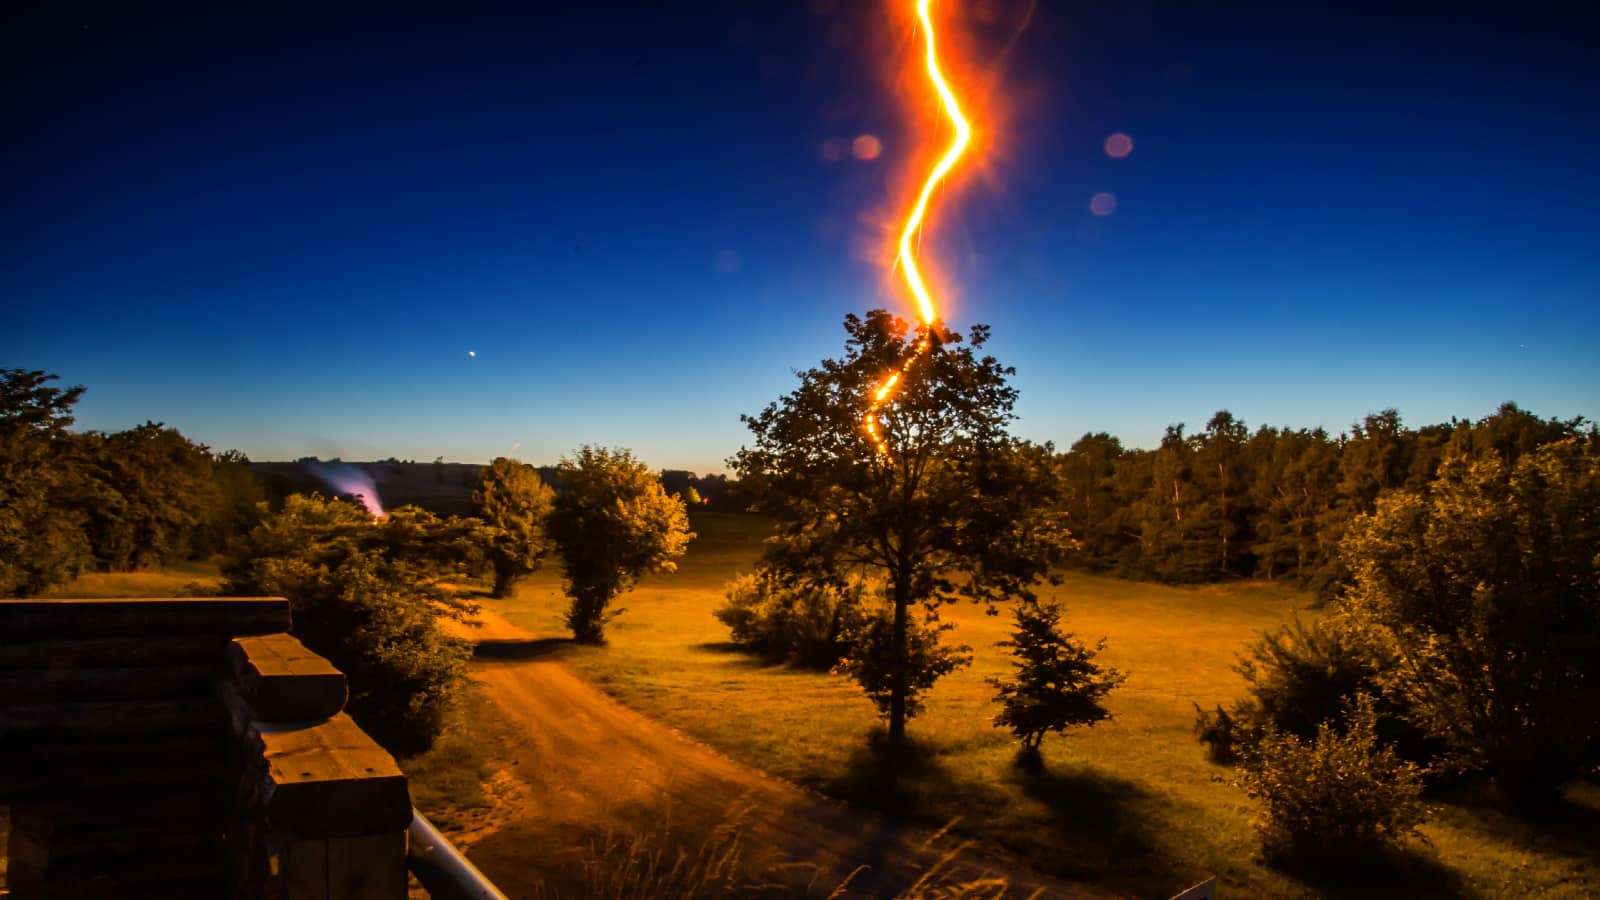 Lightning hits a house in the wild